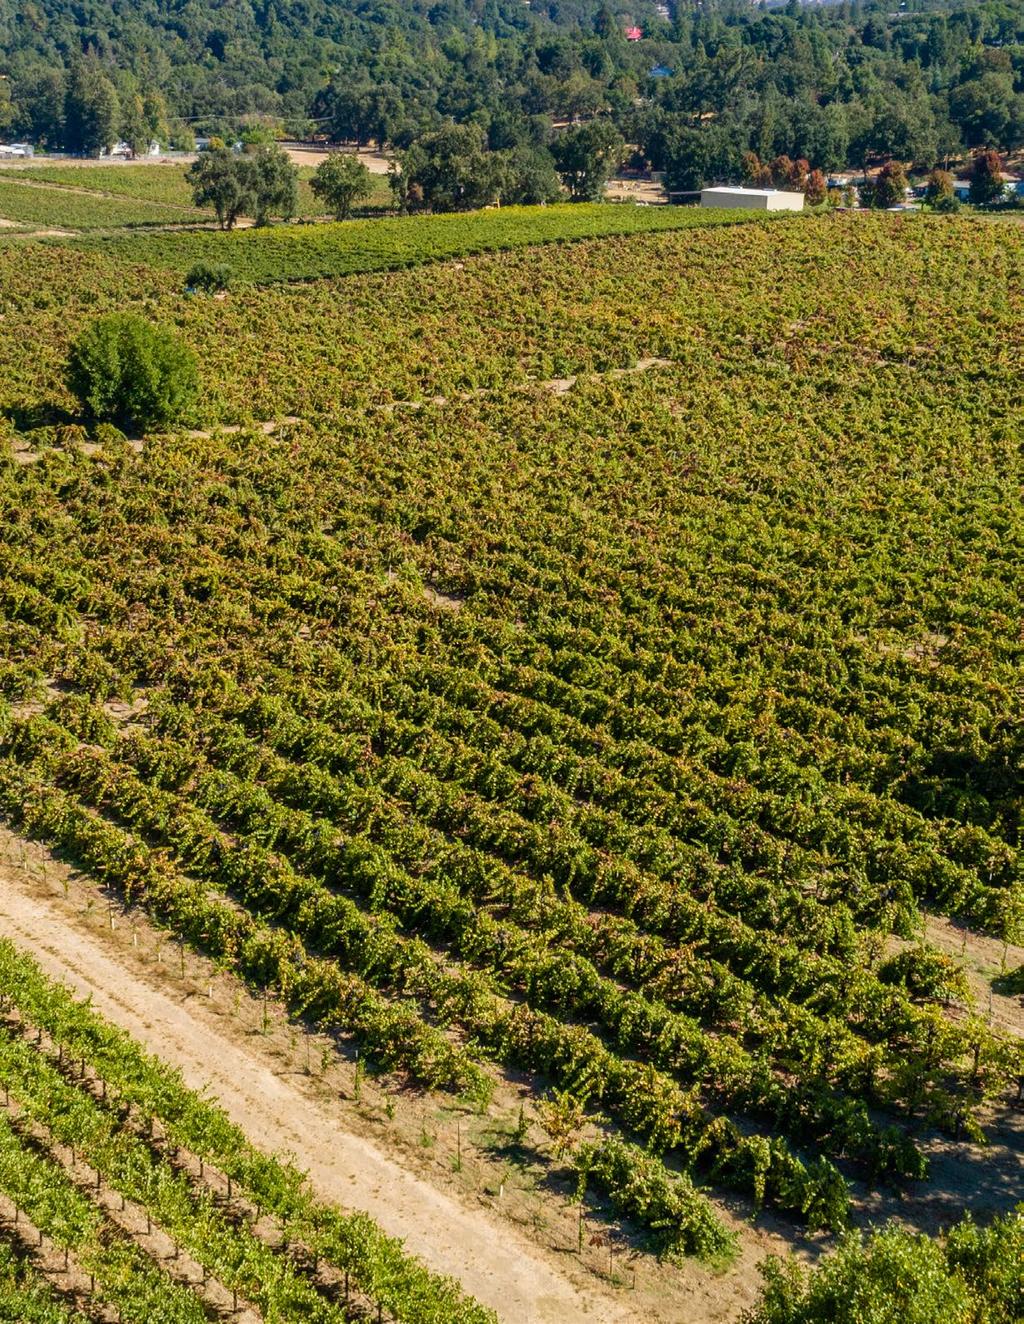 Salient Facts Location County & AVA 1300 Redemeyer Rd. Ukiah, CA Mendocino APN 178-180-04 Parcel Size Vineyard Grape Contract Soil Buildings Water Power Zoning Tax Status 29+/- acres 22.